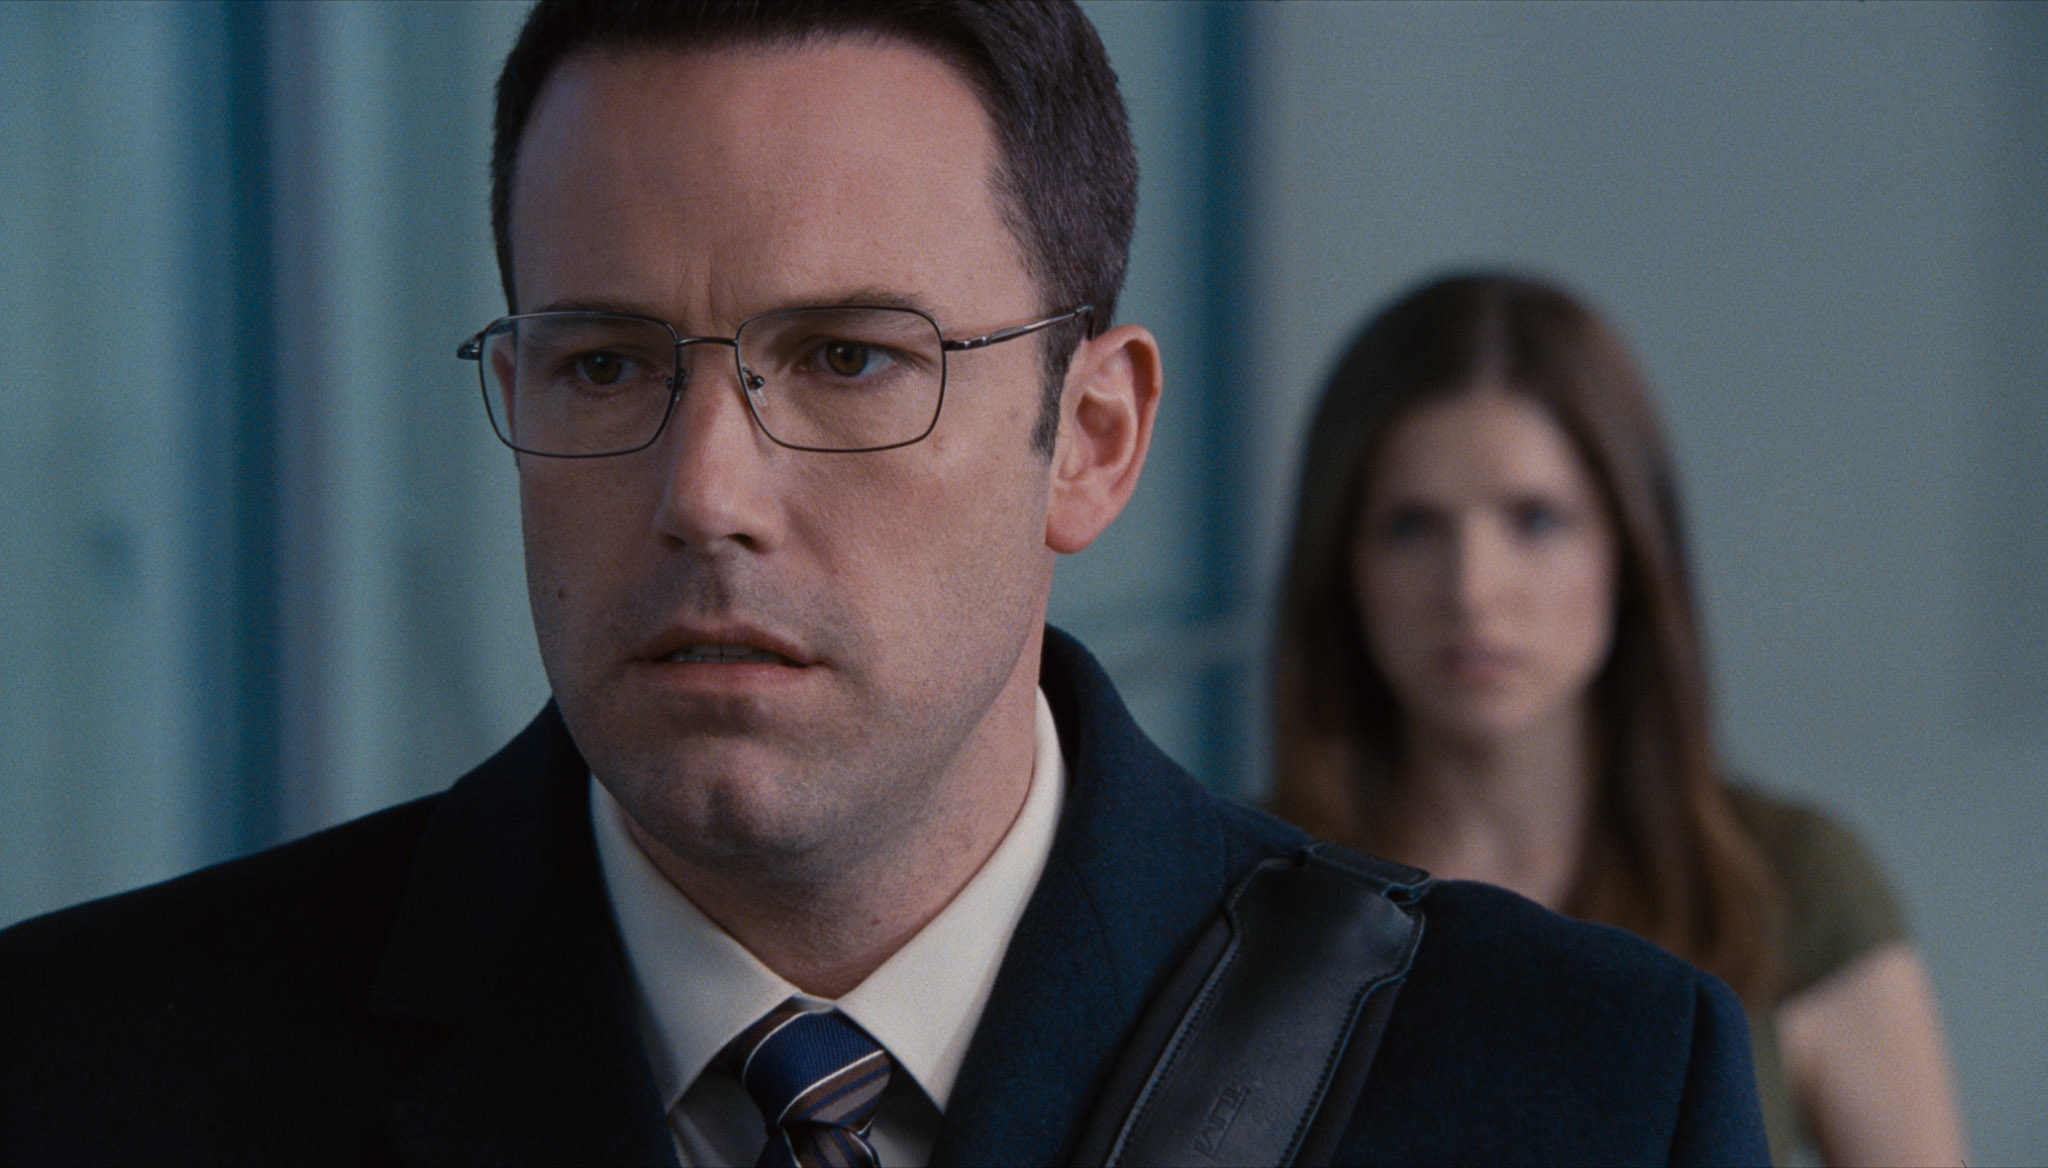 The Accountant, Action thriller, Movie posters, 2050x1170 HD Desktop